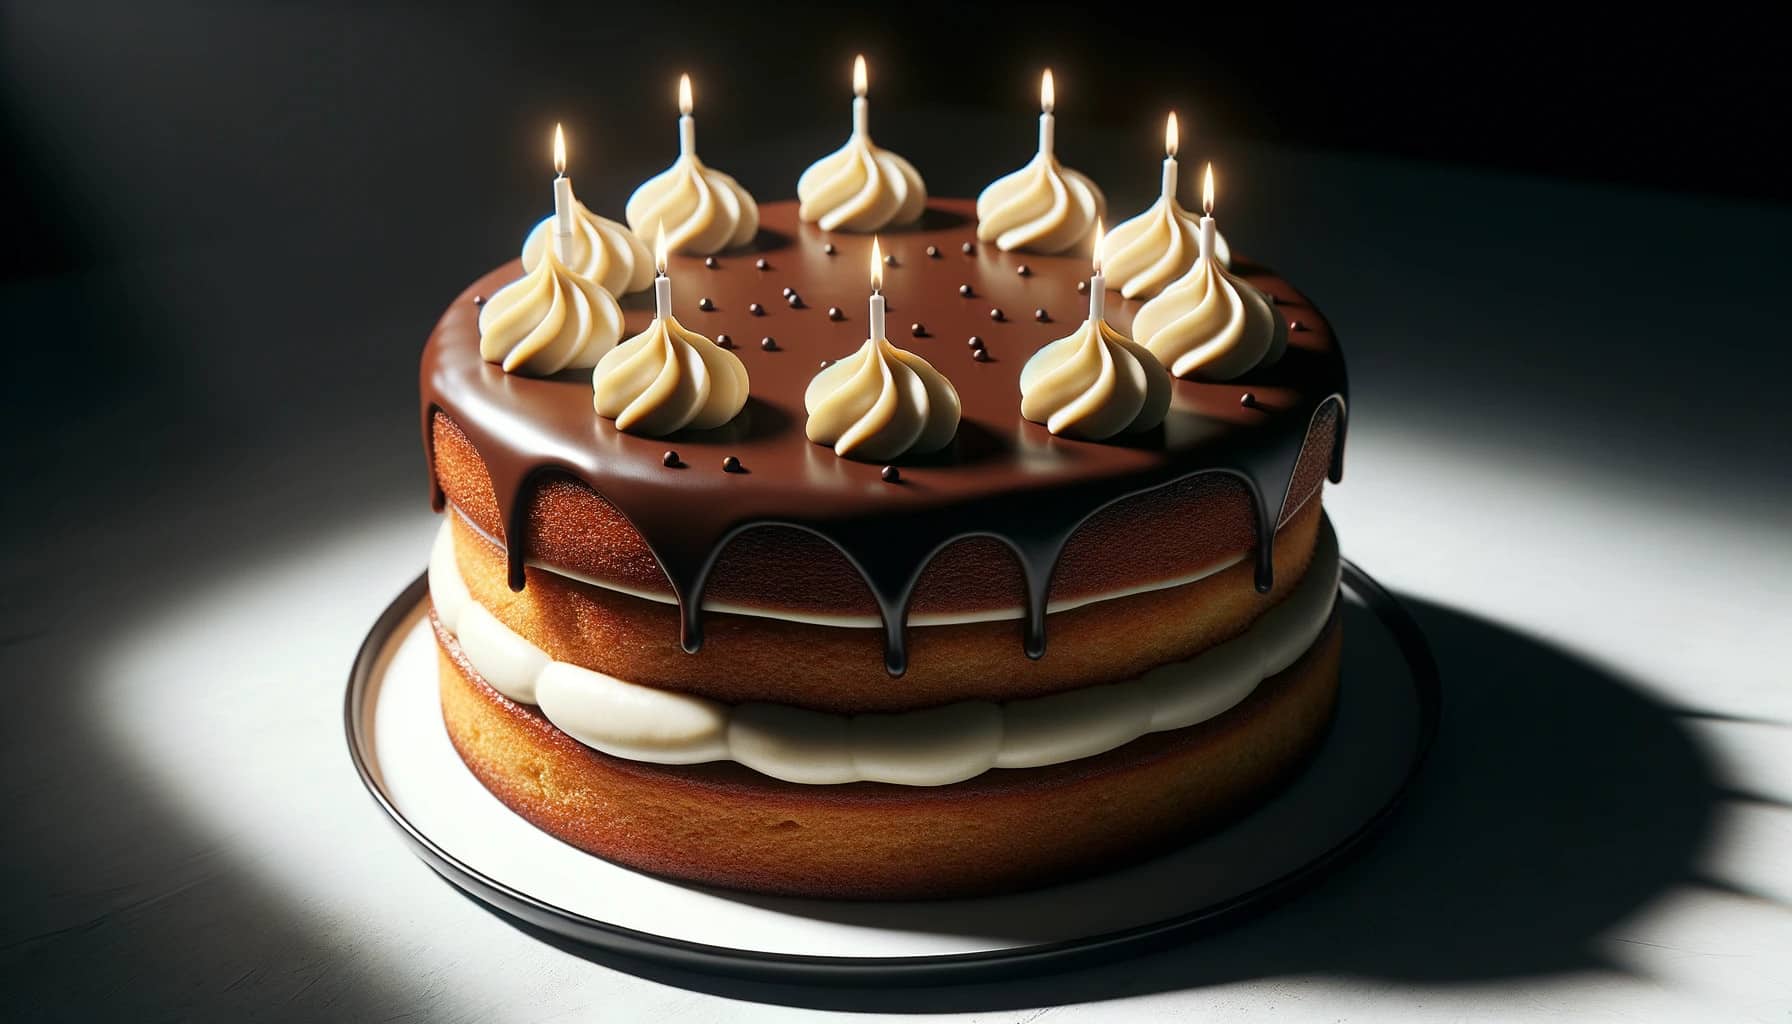 A classic coconut flour birthday cake topped with a sugar-free chocolate glaze. The cake sits on a plate.